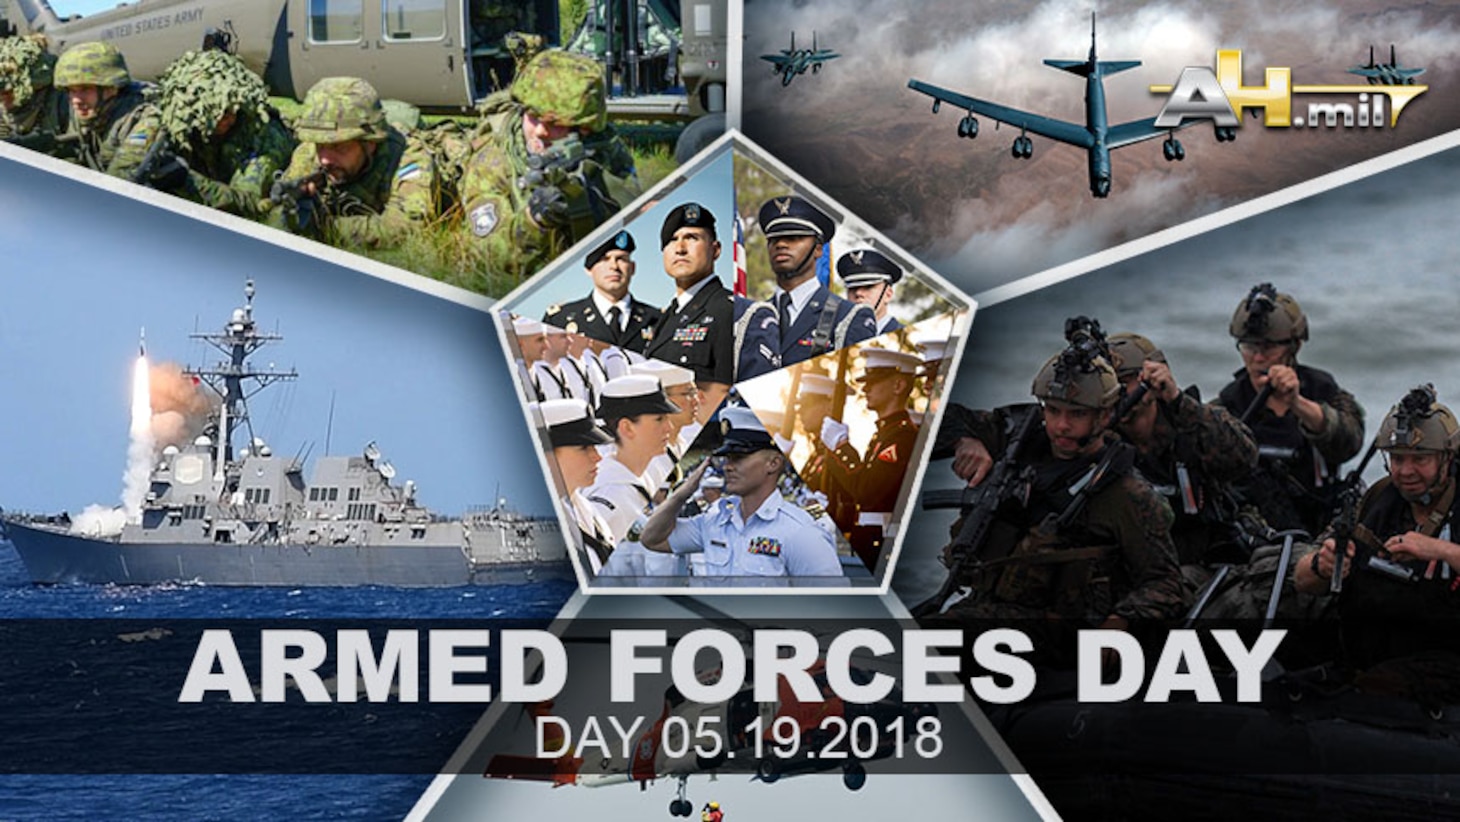 A Brief History of Armed Forces Day - Military Connection